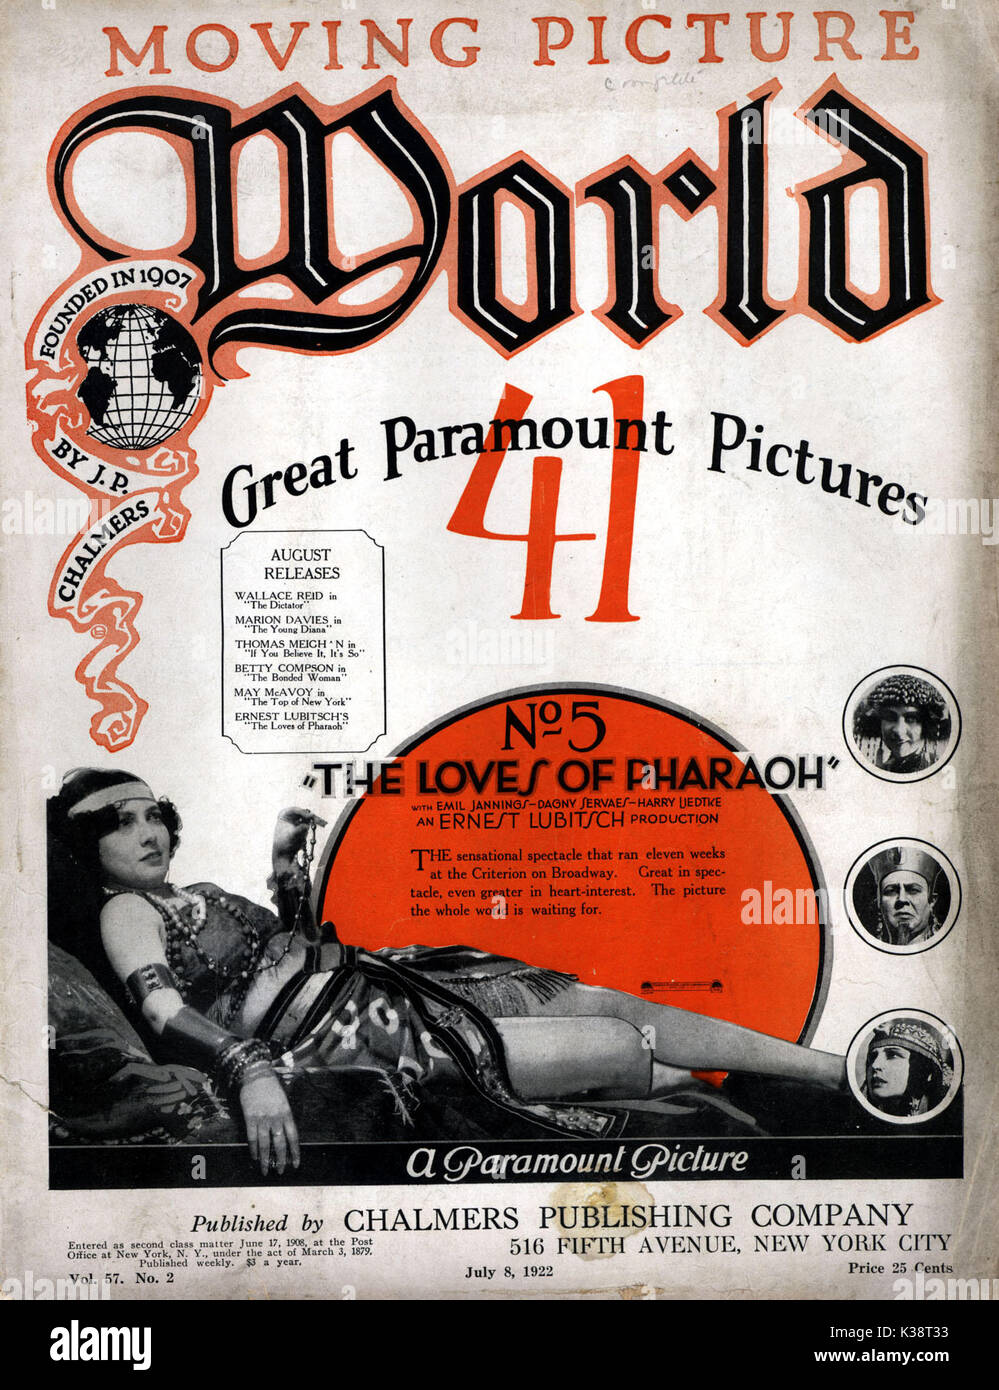 MOVING PICTURE WORLD 8.7.1922 THE LOVES OF PHARAOH Stock Photo